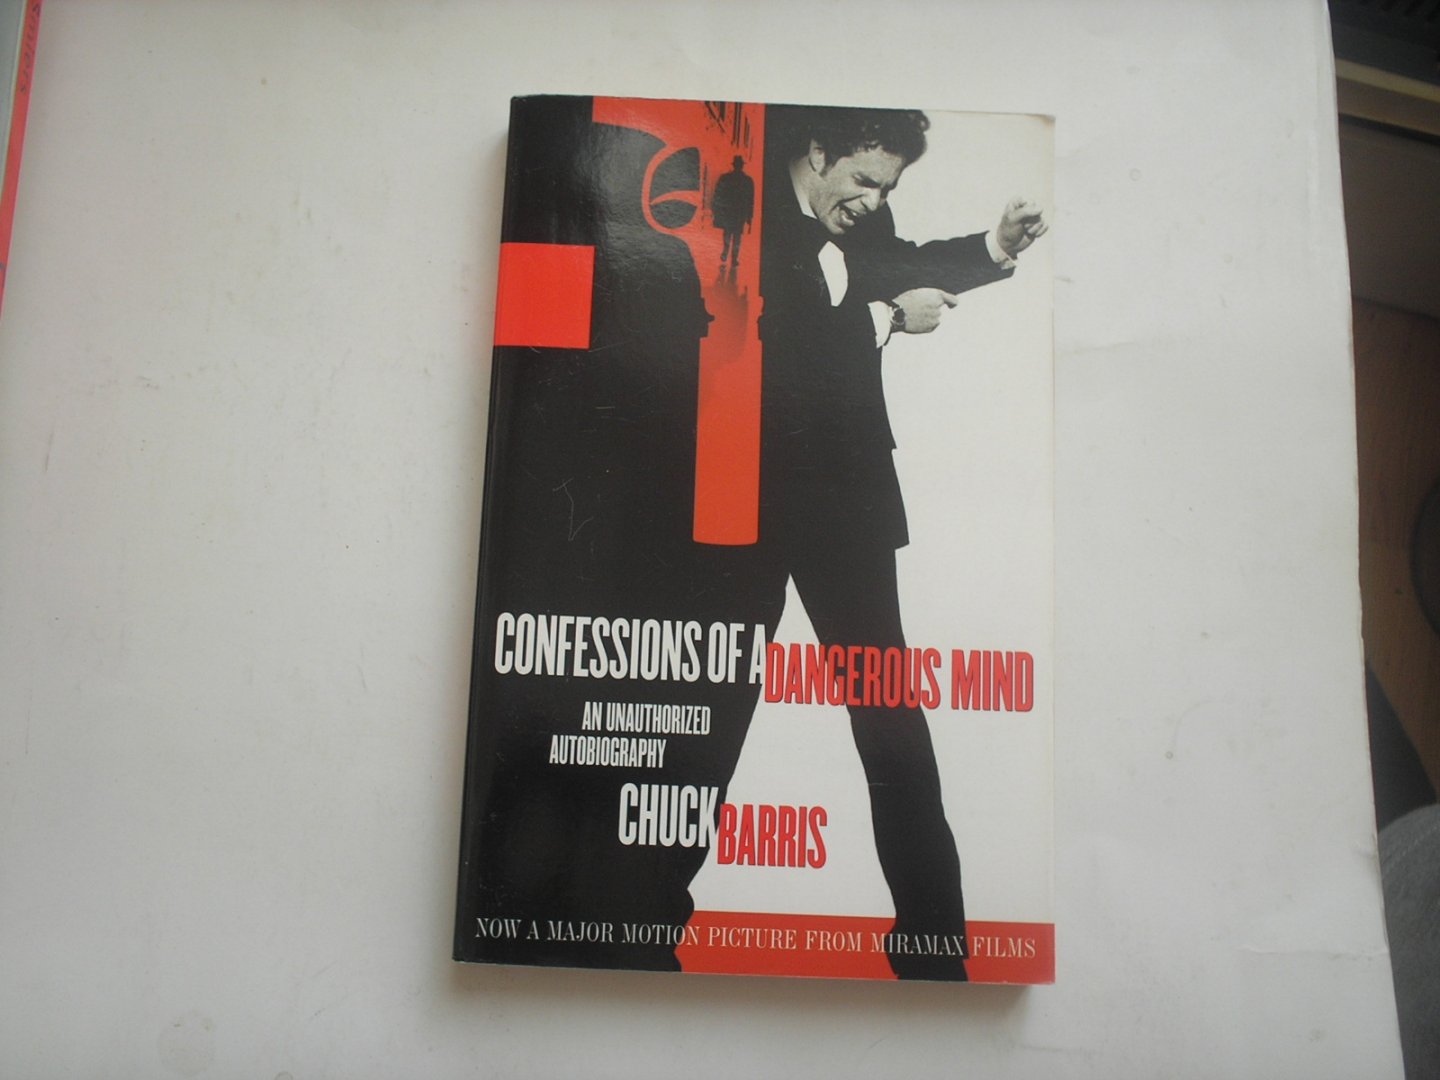 Barris, Chuck - Confessions of a dangerous mind, an unauauthorized autobiography